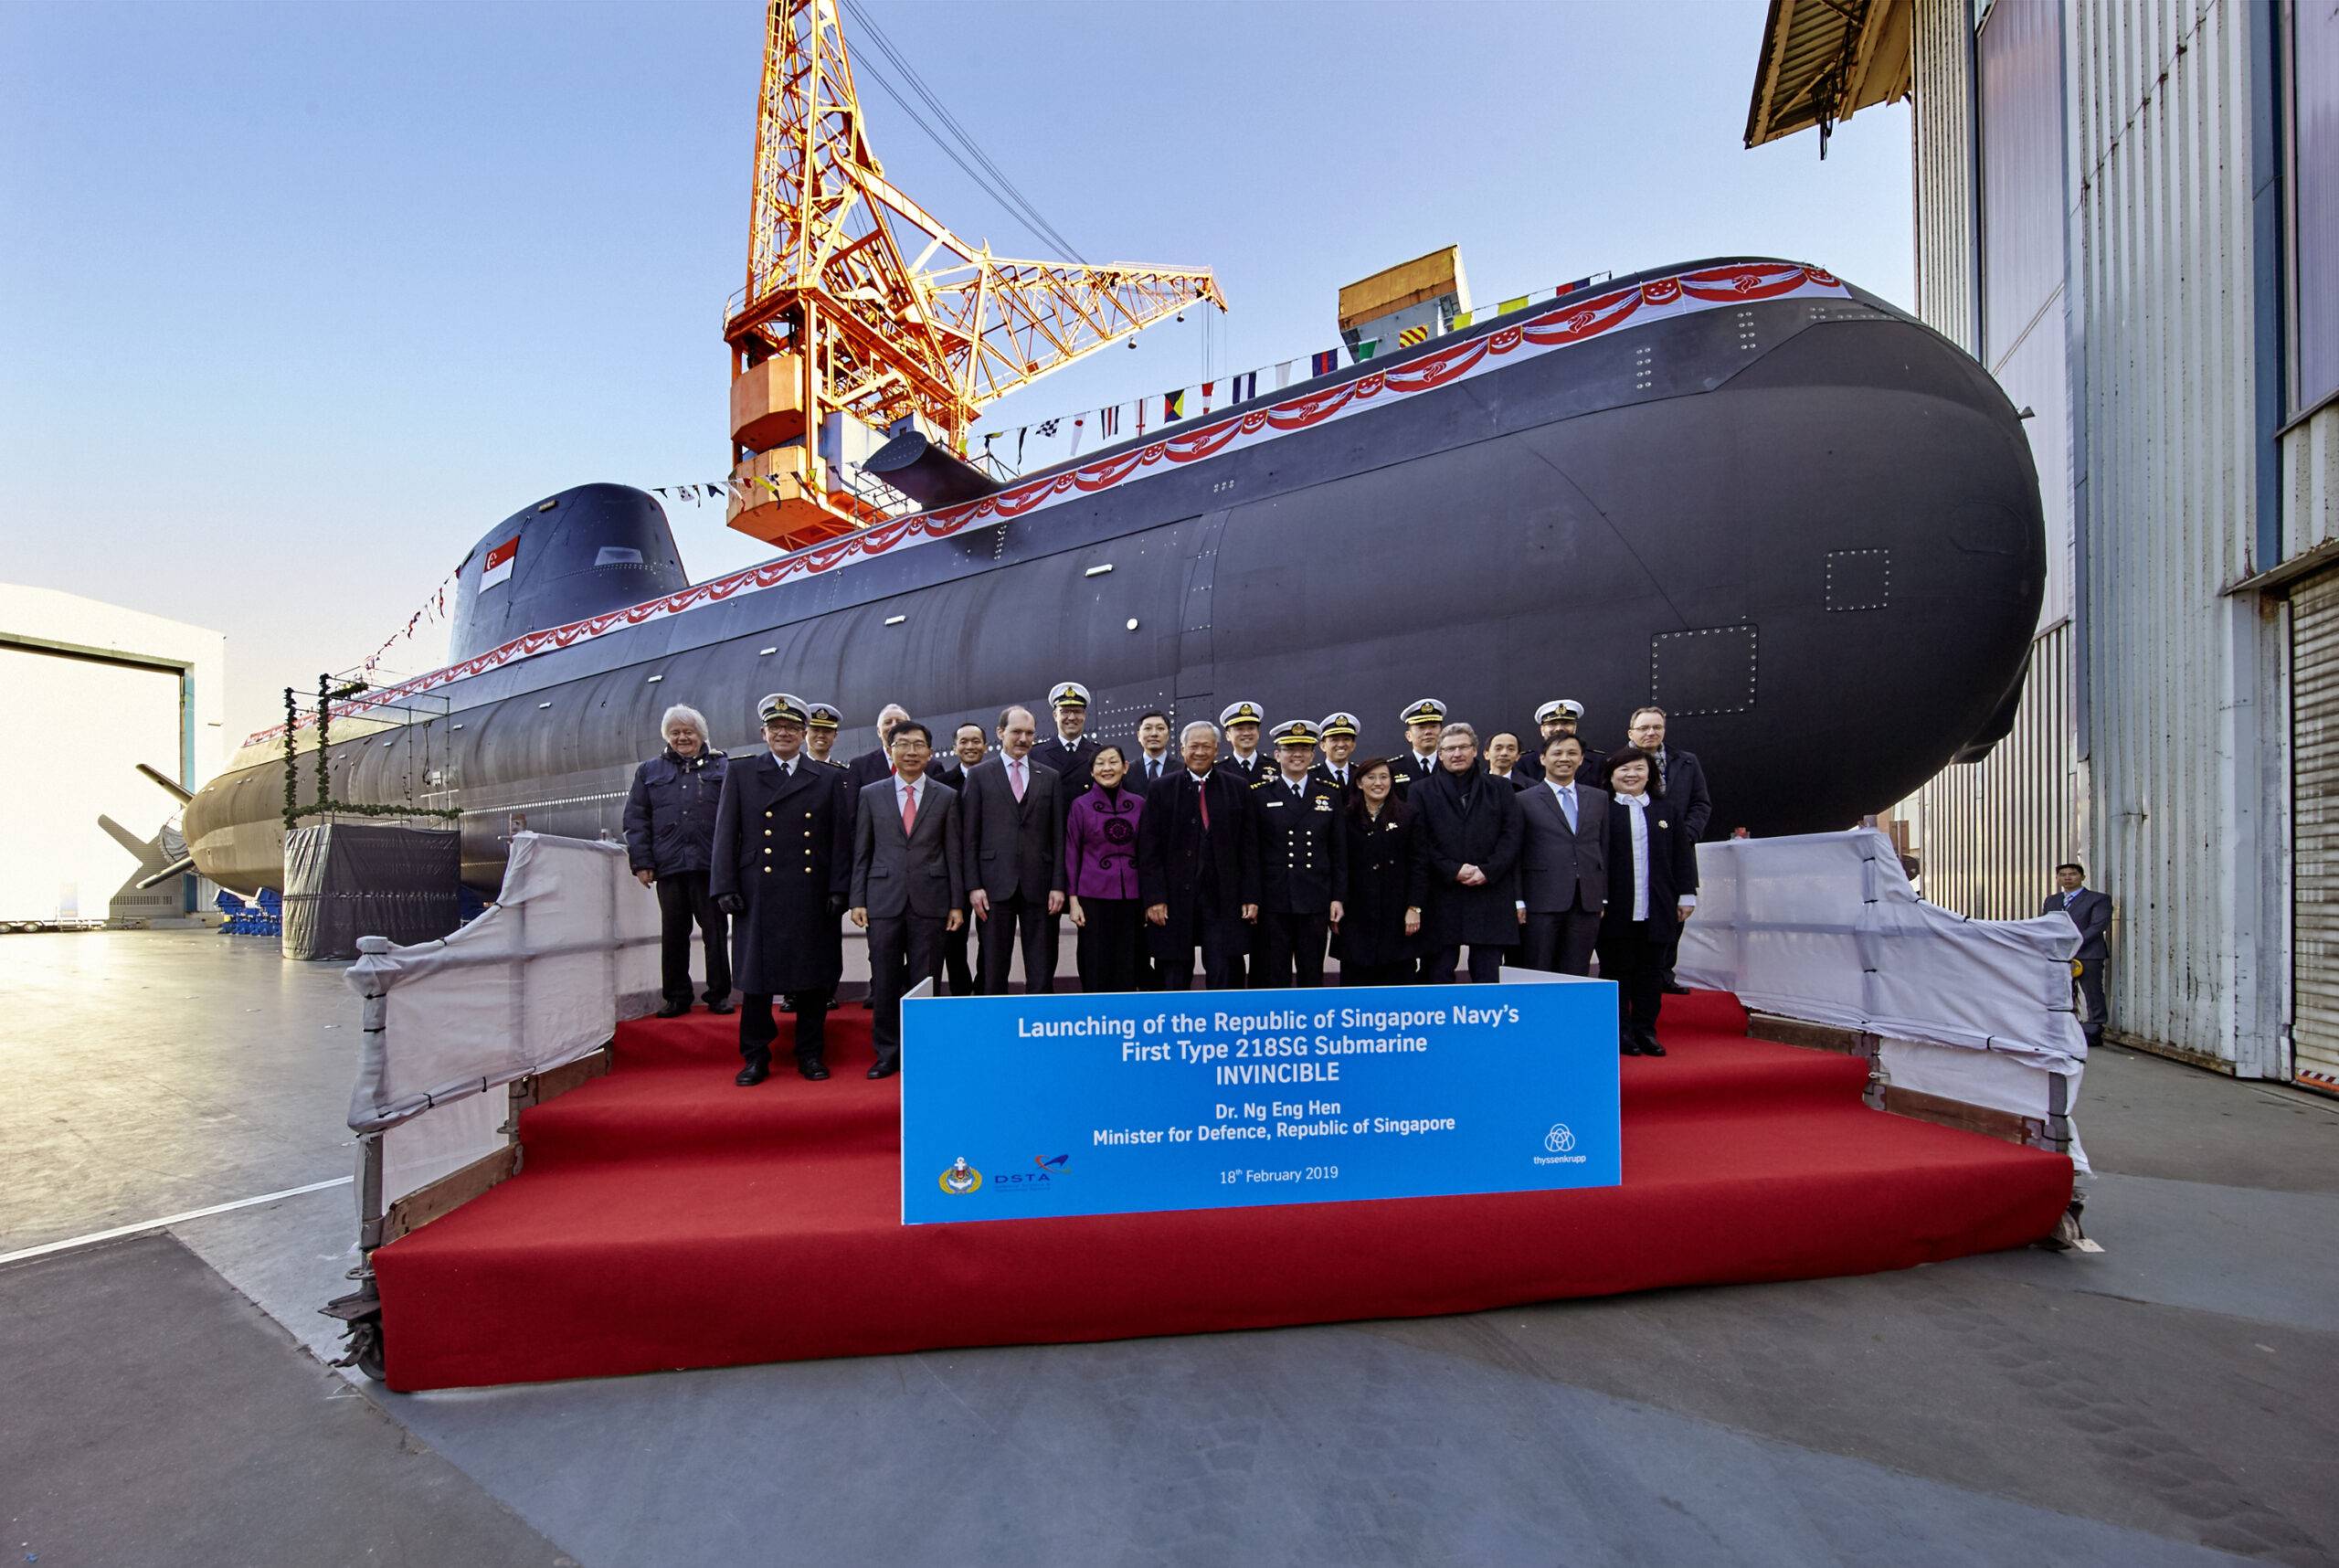 190218 Launching ceremony HDW Class 218SG submarine scaled